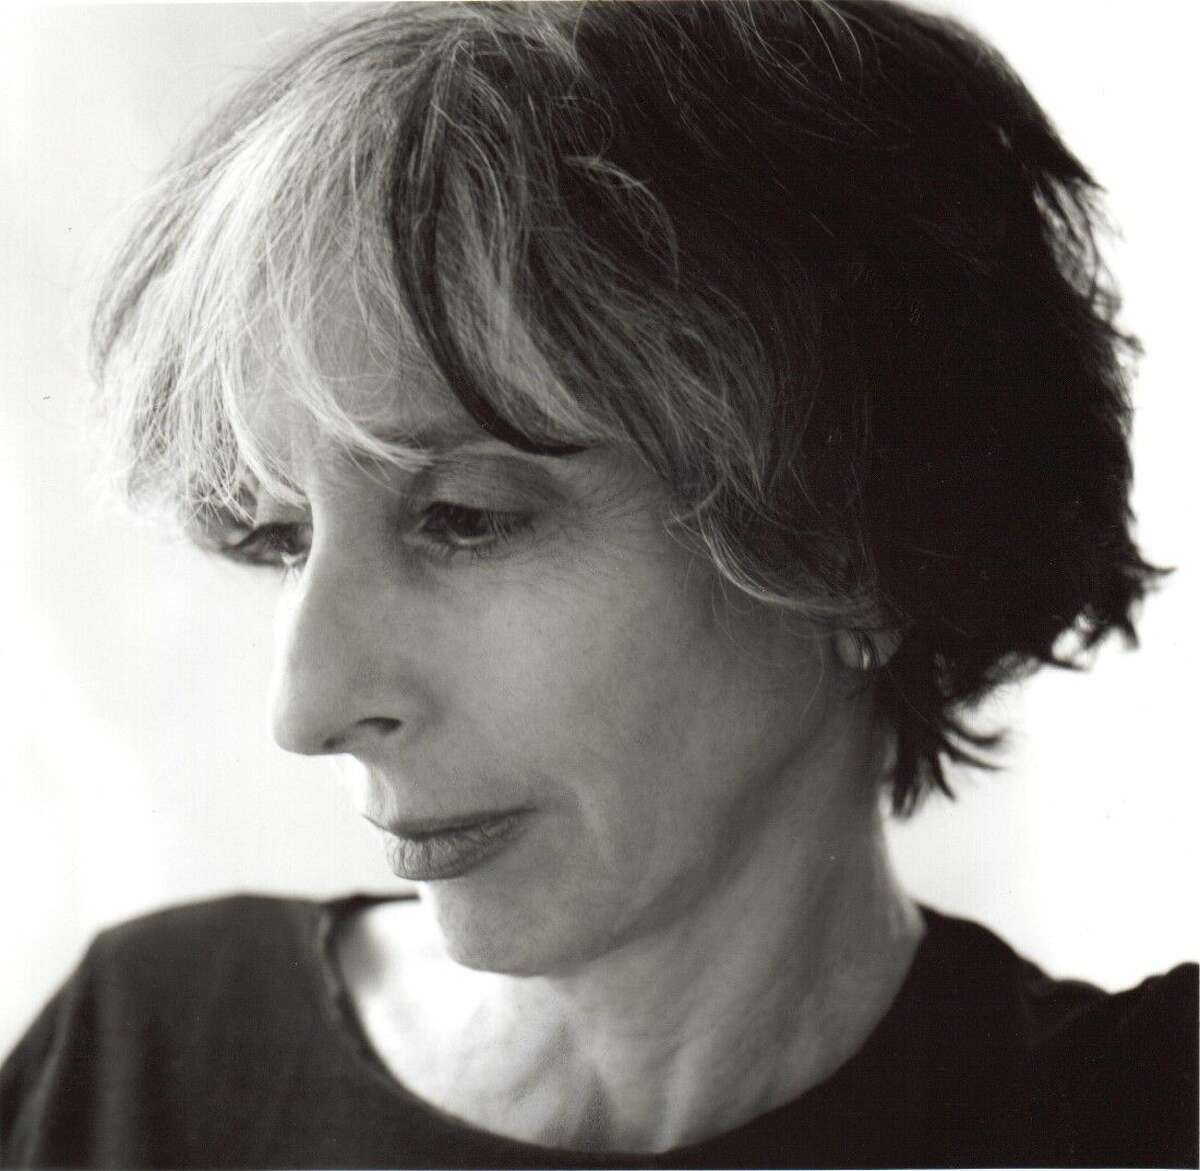 Inprint, Houston’s premier literary arts nonprofit organization, presents an evening with renowned fiction writers Deborah Eisenberg & Antonya Nelson as part of the 2014/2015 Inprint Margarett Root Brown Reading Series on Monday, Oct. 13 at 7:30 p.m. (doors open 6:45 p.m.)